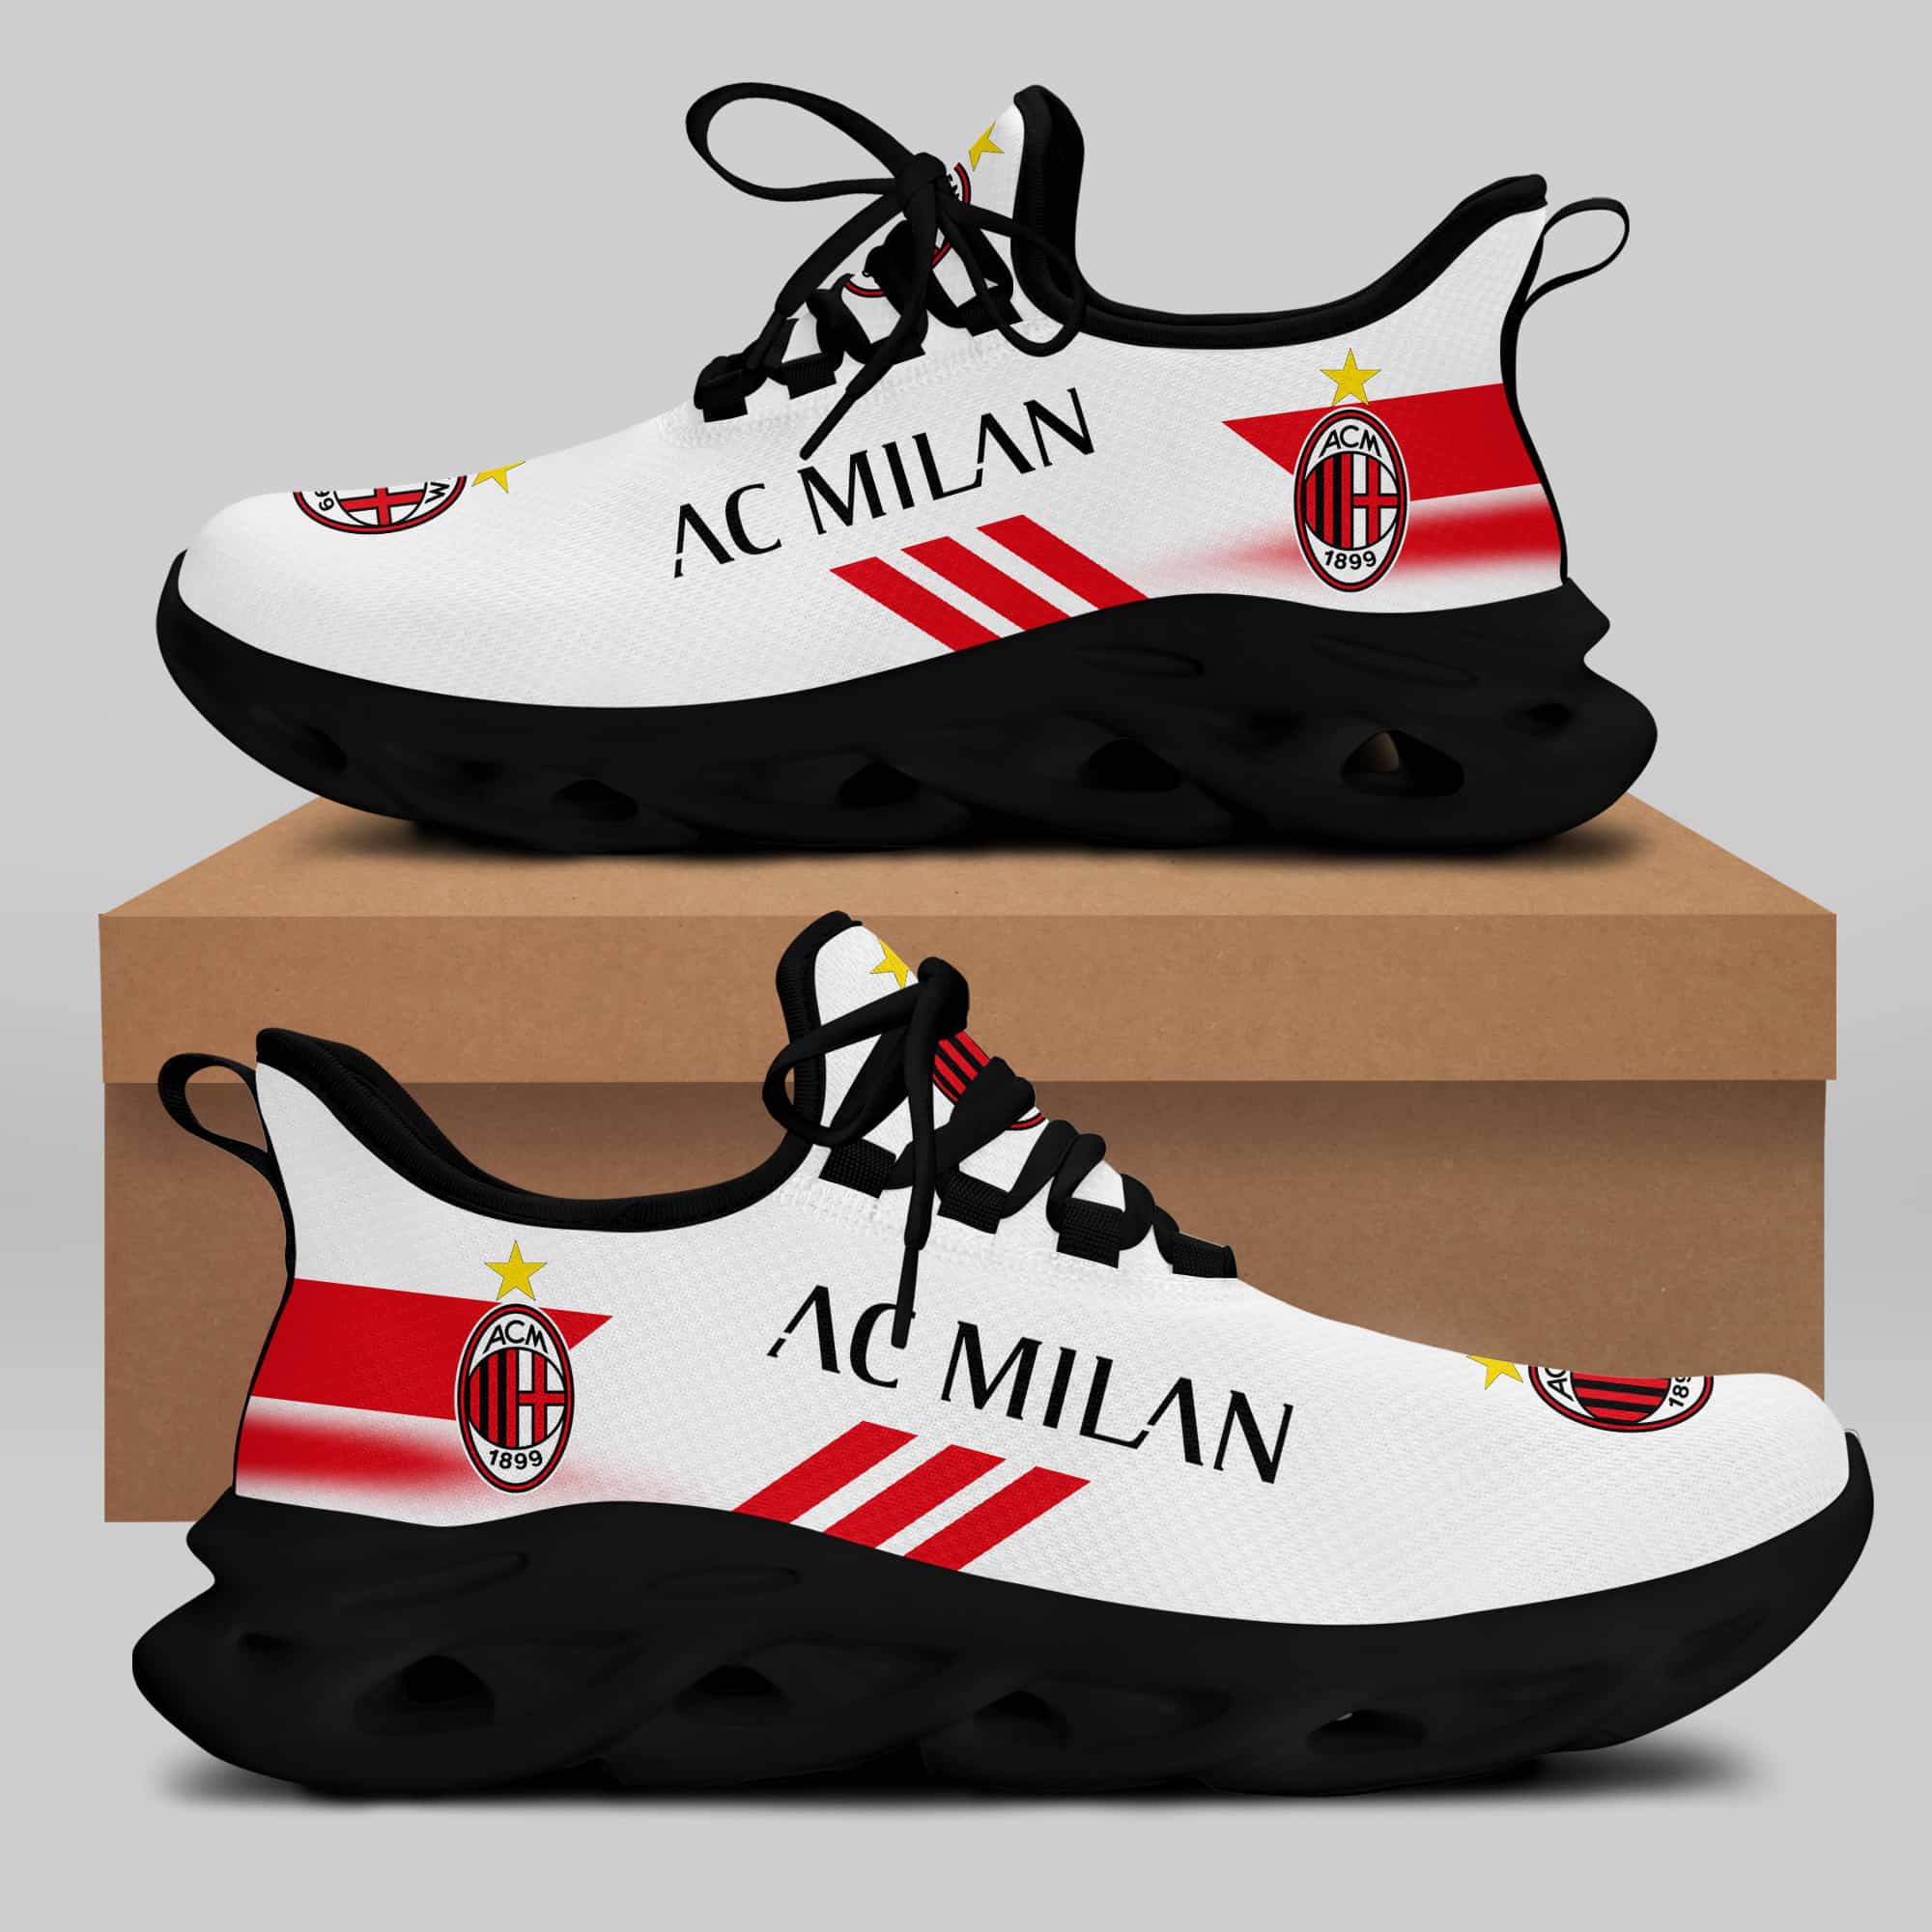 Ac Milan Running Shoes Max Soul Shoes Sneakers Ver 35 2